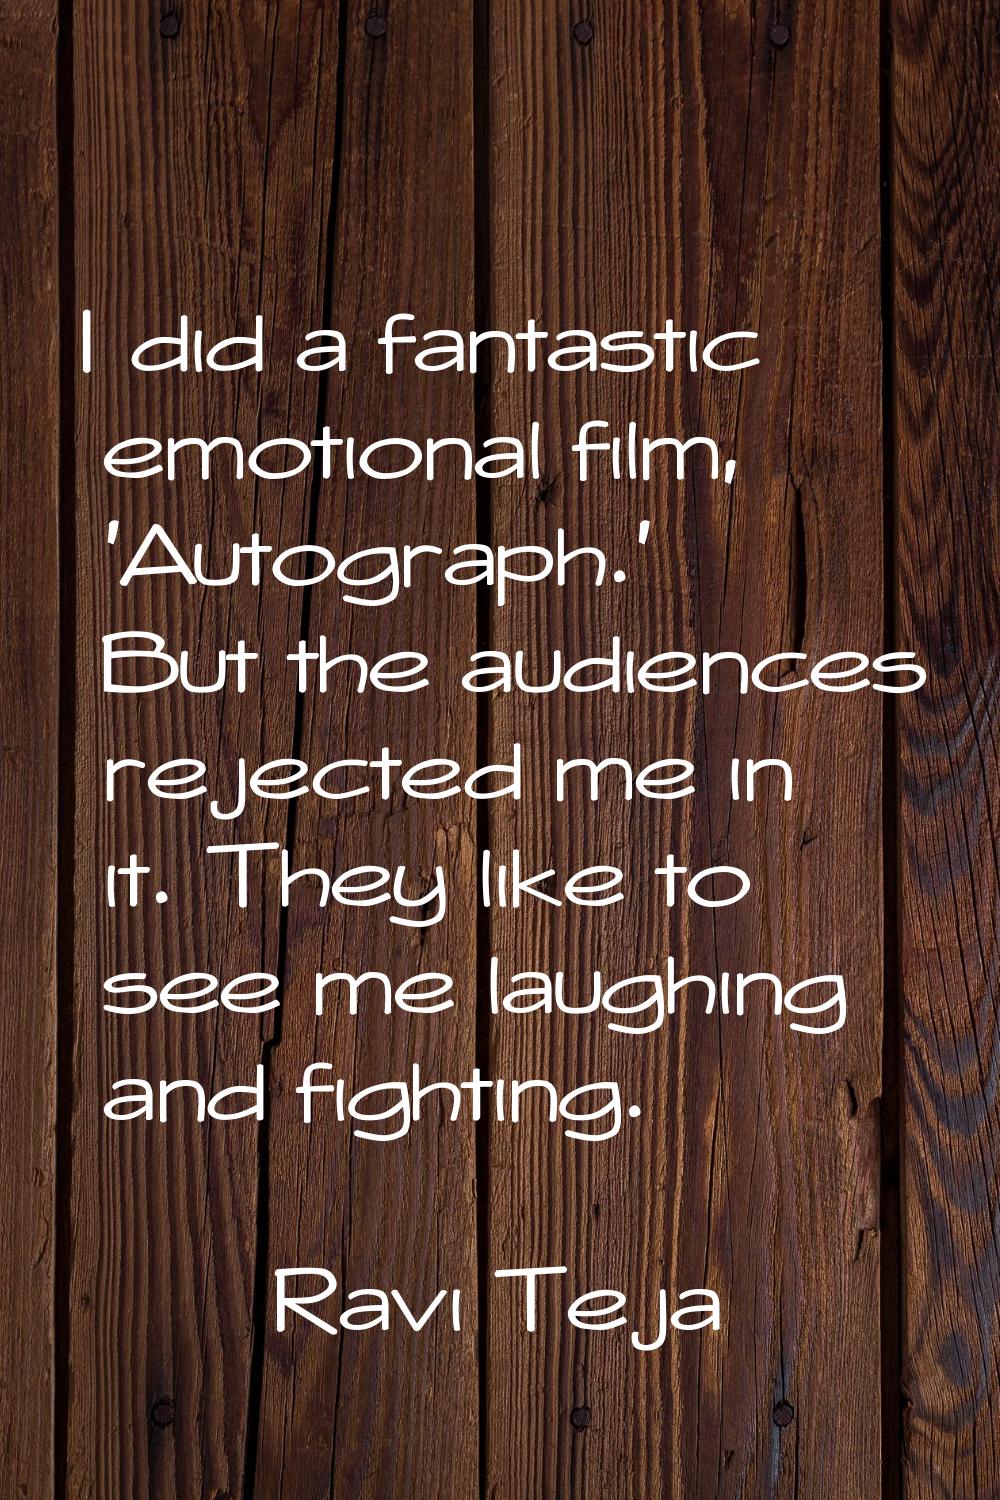 I did a fantastic emotional film, 'Autograph.' But the audiences rejected me in it. They like to se